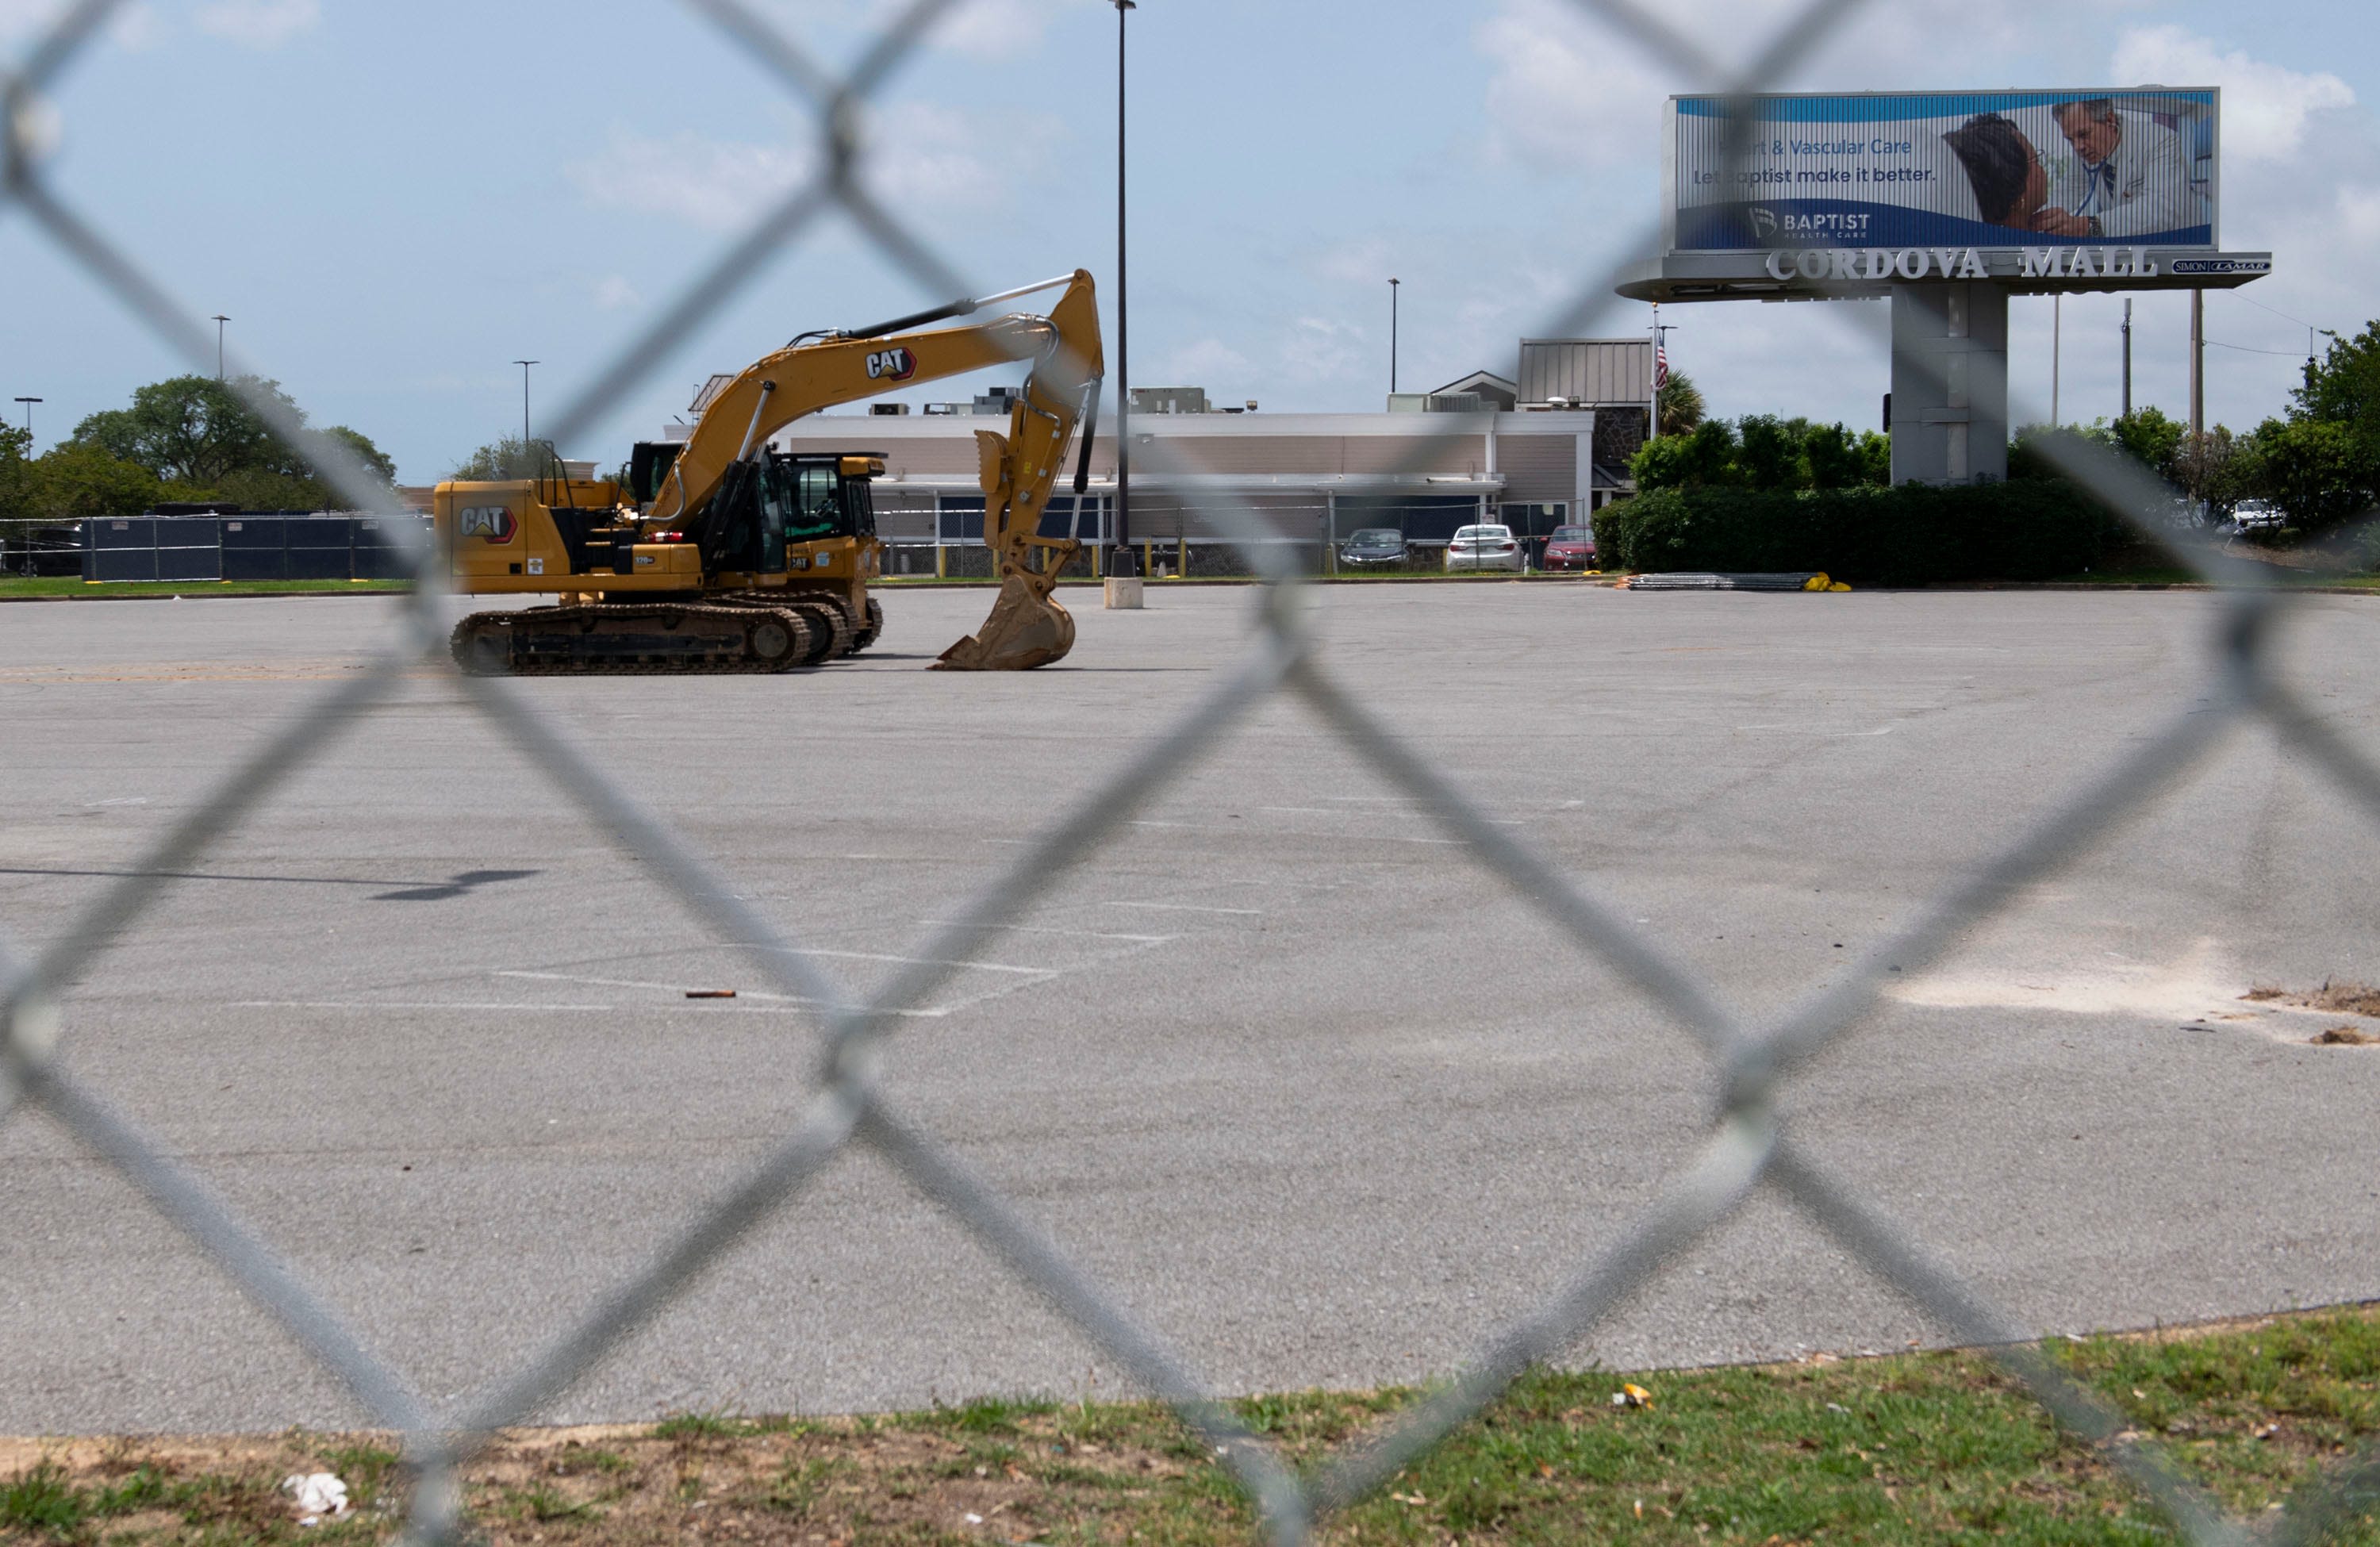 Curious about the construction outside Cordova Mall? Here's what's coming